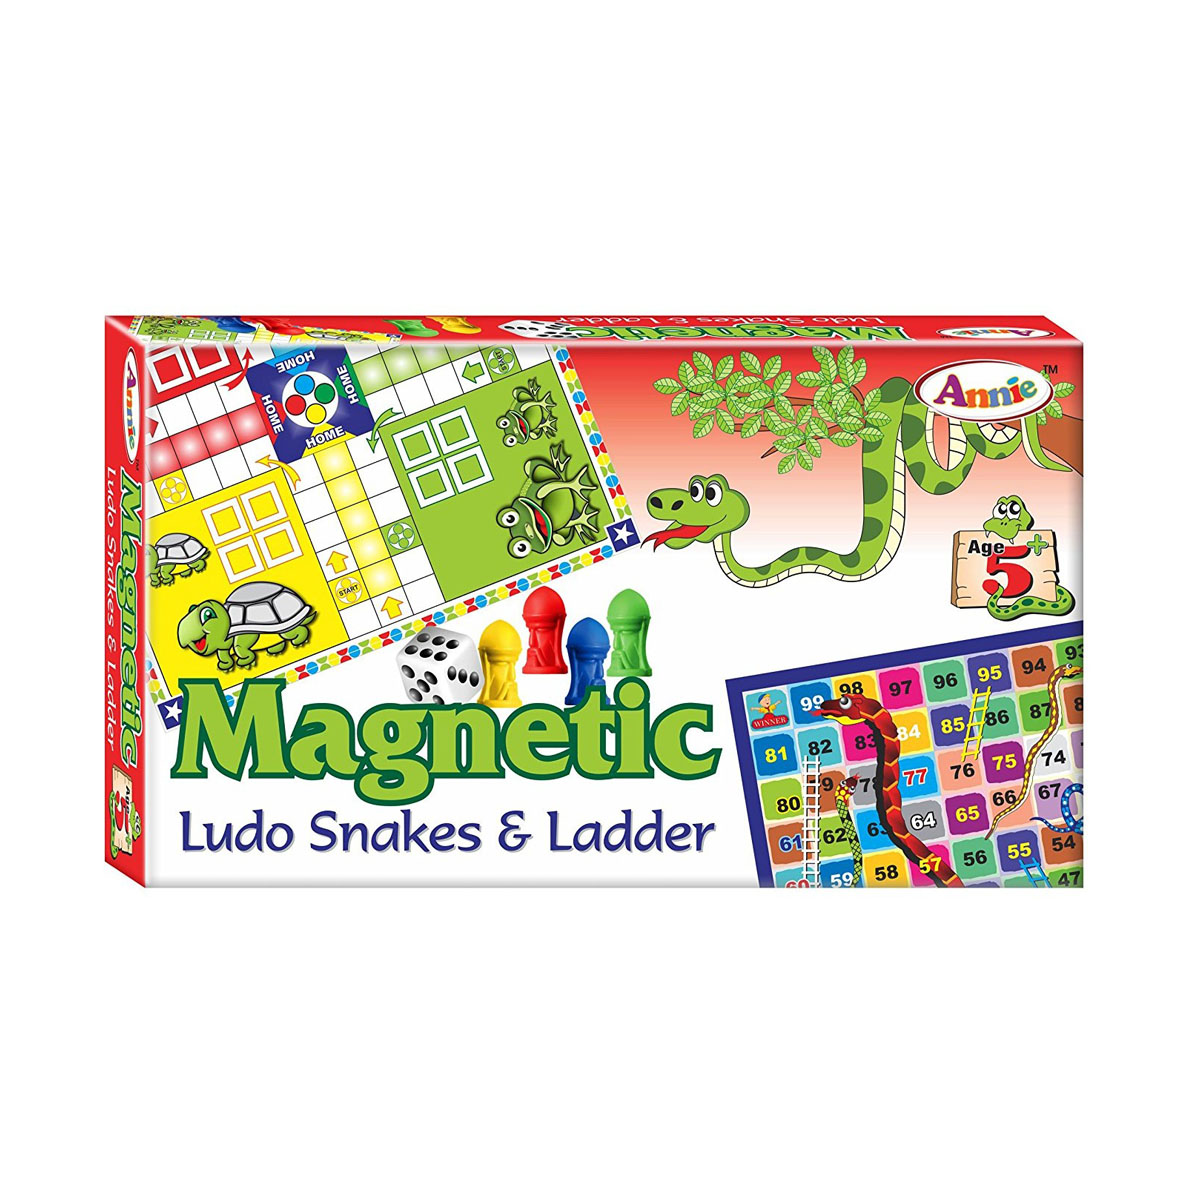 Magnetic Ludo Snakes & Ladders